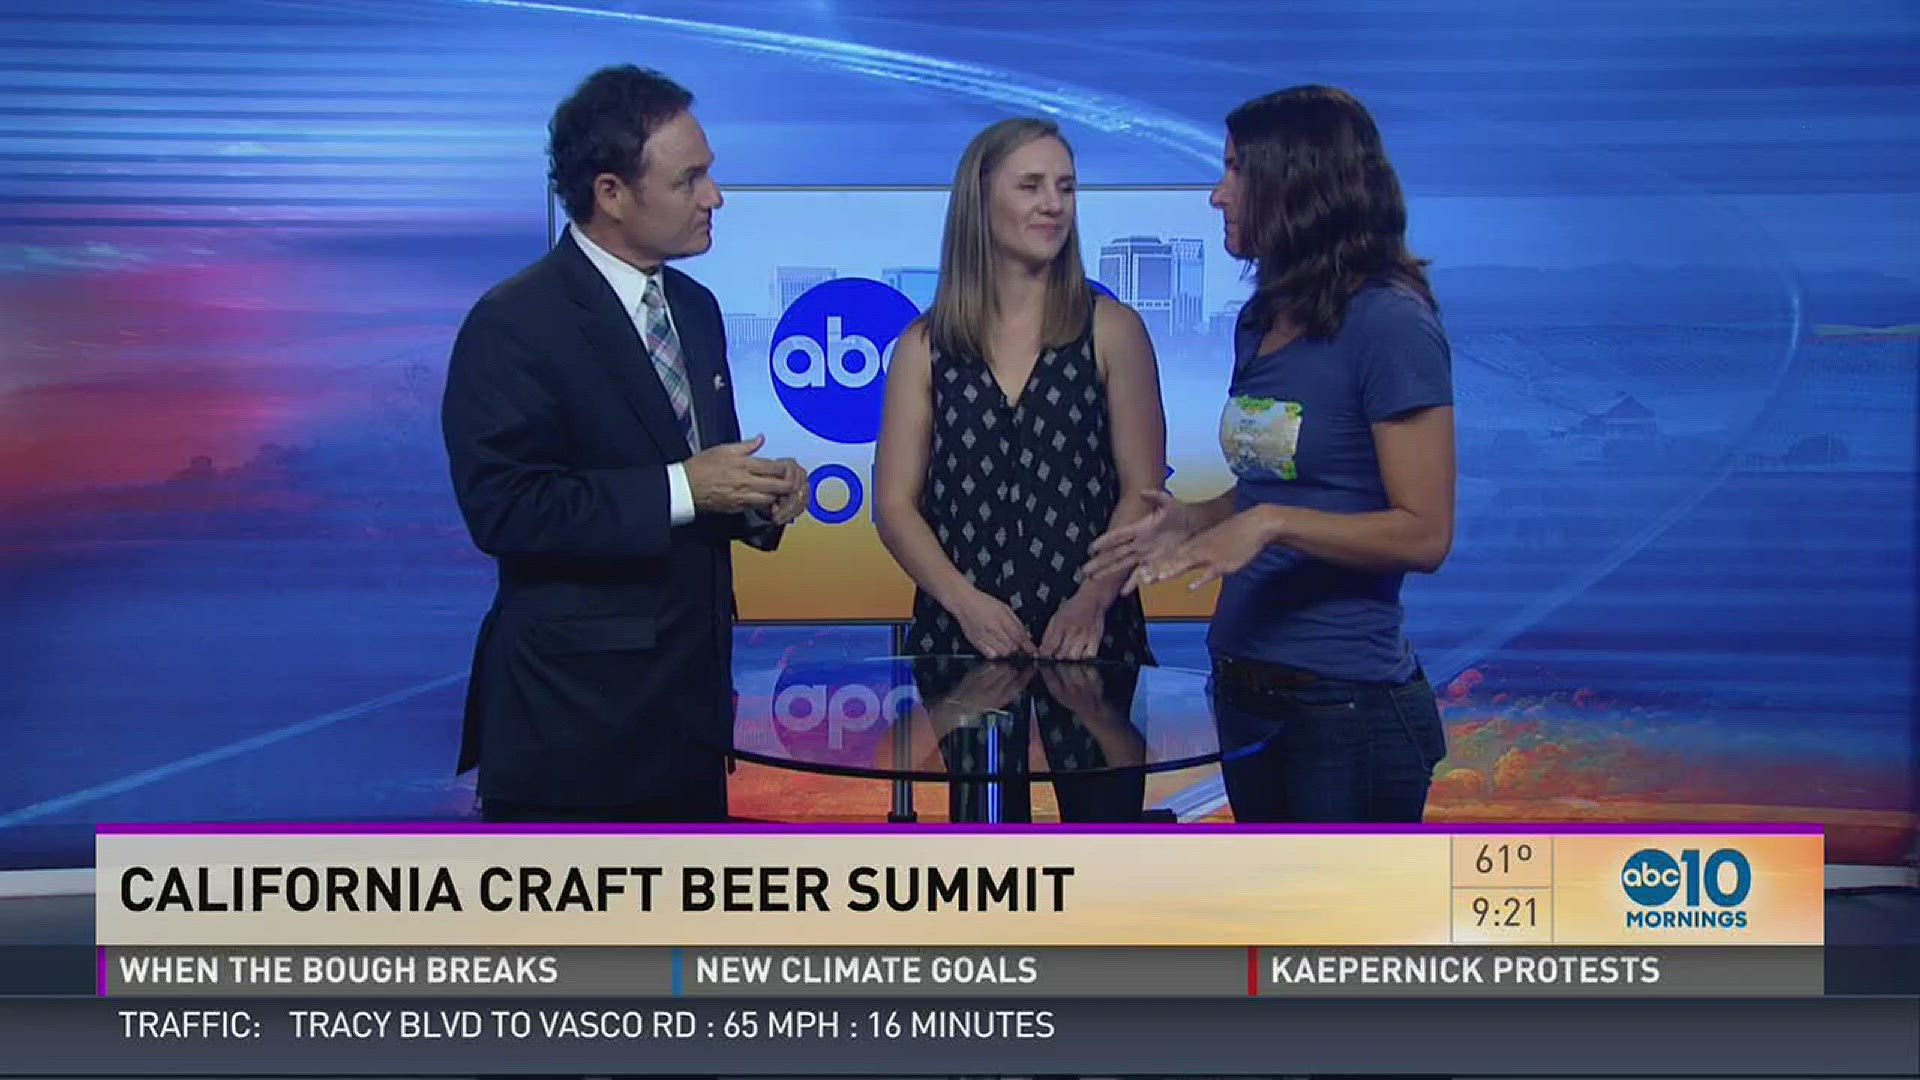 Walt Gray chats with Sante Adairius Rustic Ales' Adair Paterno and CCBA Managing Director Leia Ostermann about what's taking place at the California Craft Beer Summit, going on through tomorrow evening.